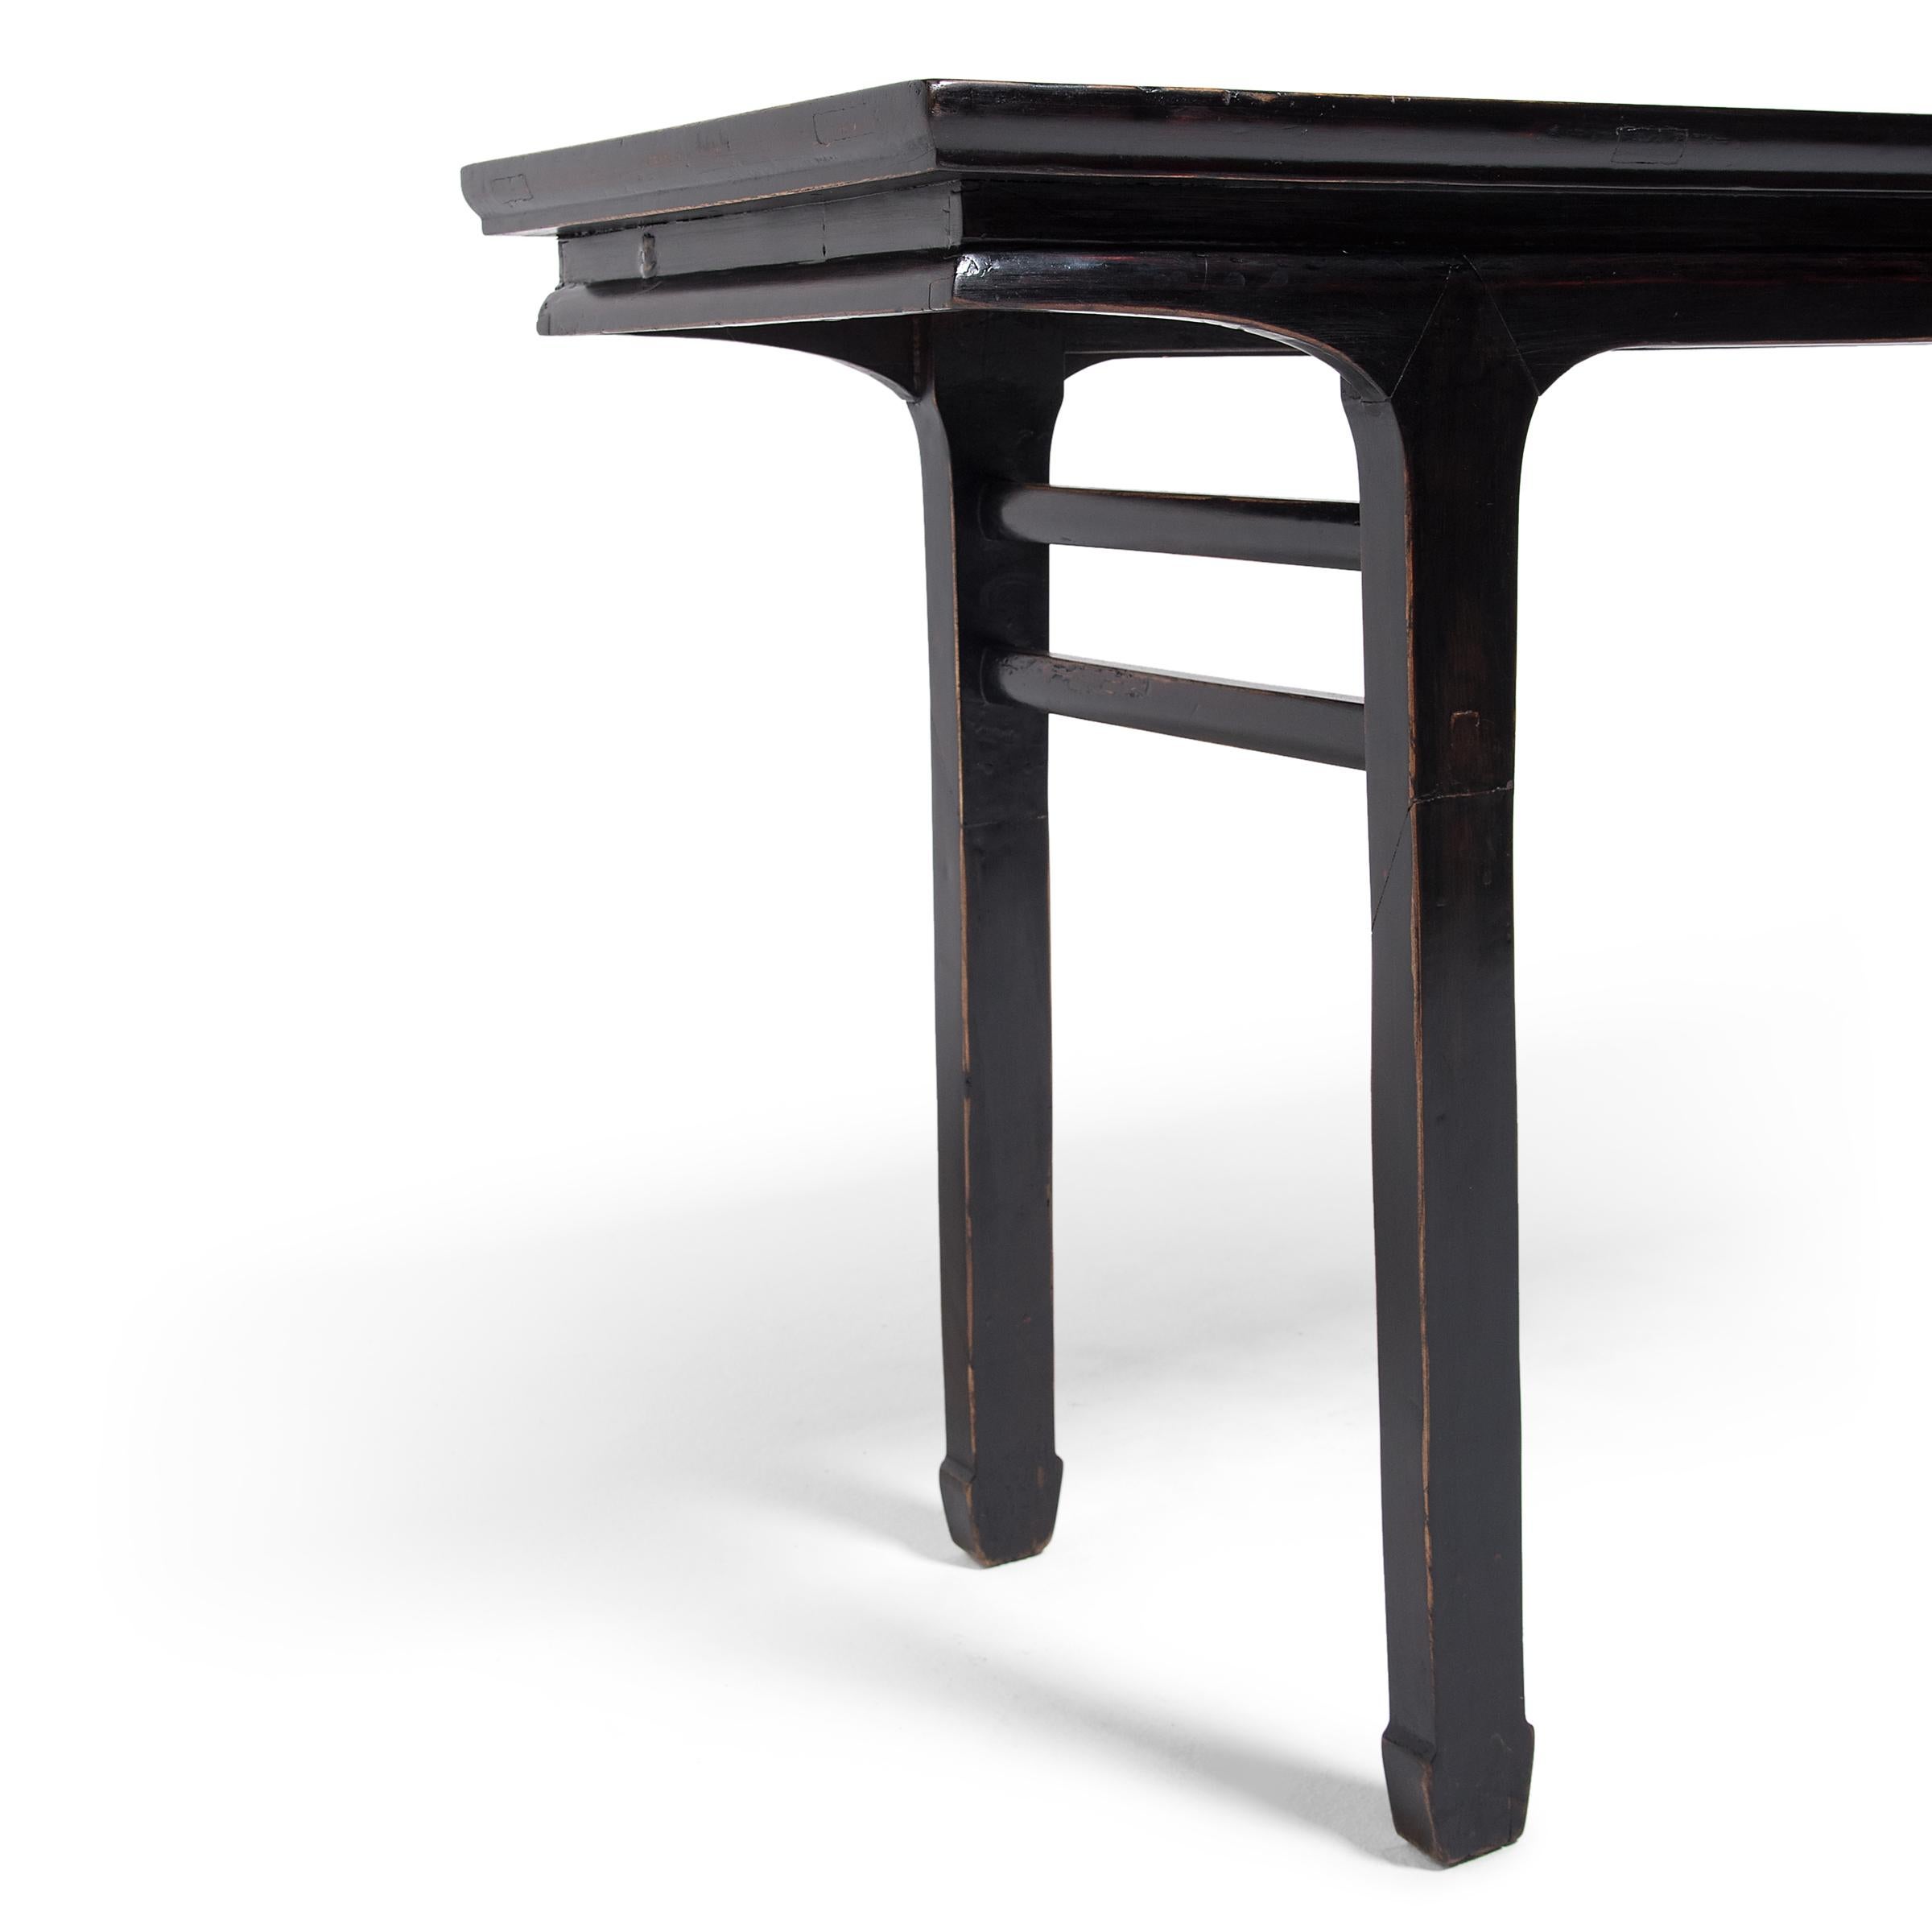 20th Century Chinese Black Lacquer Altar Table, c. 1900